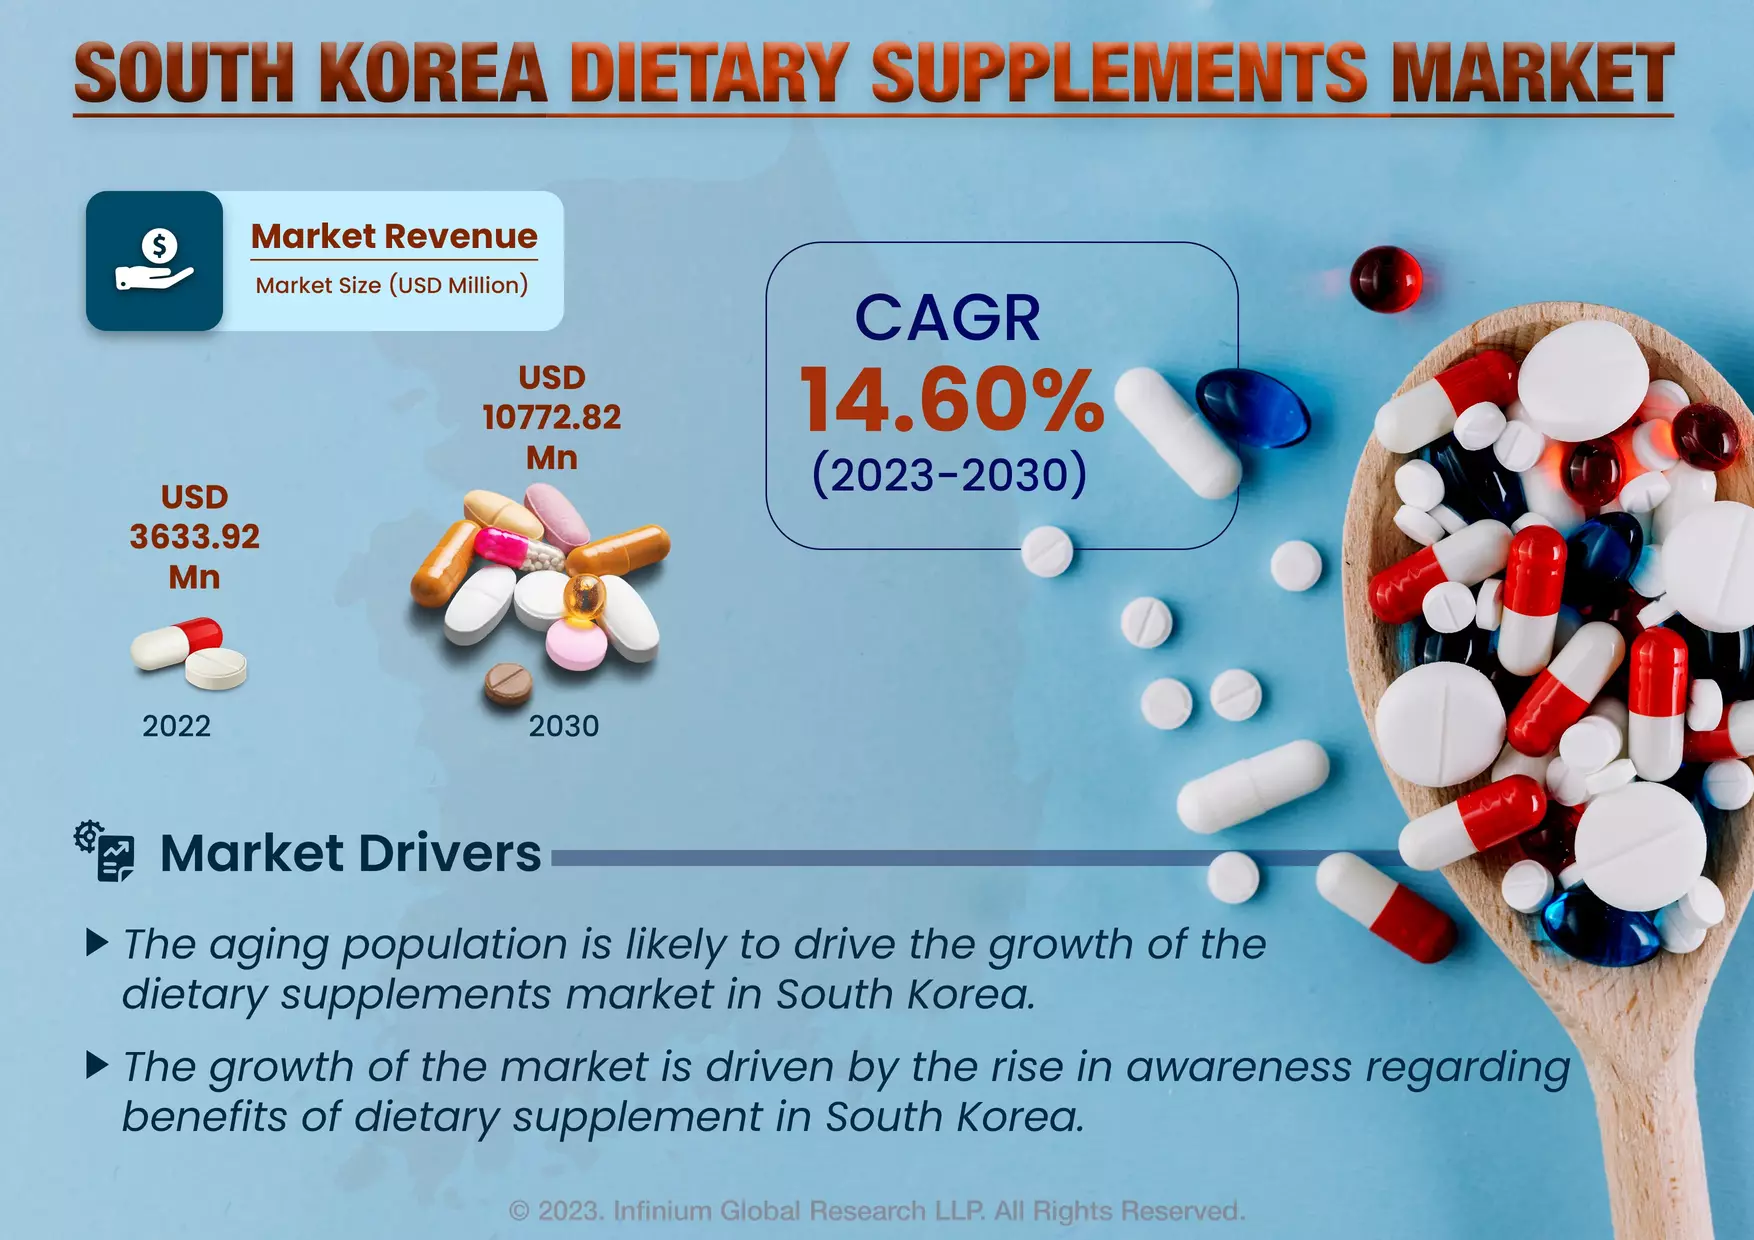 South Korea Dietary Supplements Market was Valued at USD 3633.92 Million in 2022 and is Expected to Reach USD 10772.82 Million by 2030 and Grow at a CAGR of 14.60% Over the Forecast Period.